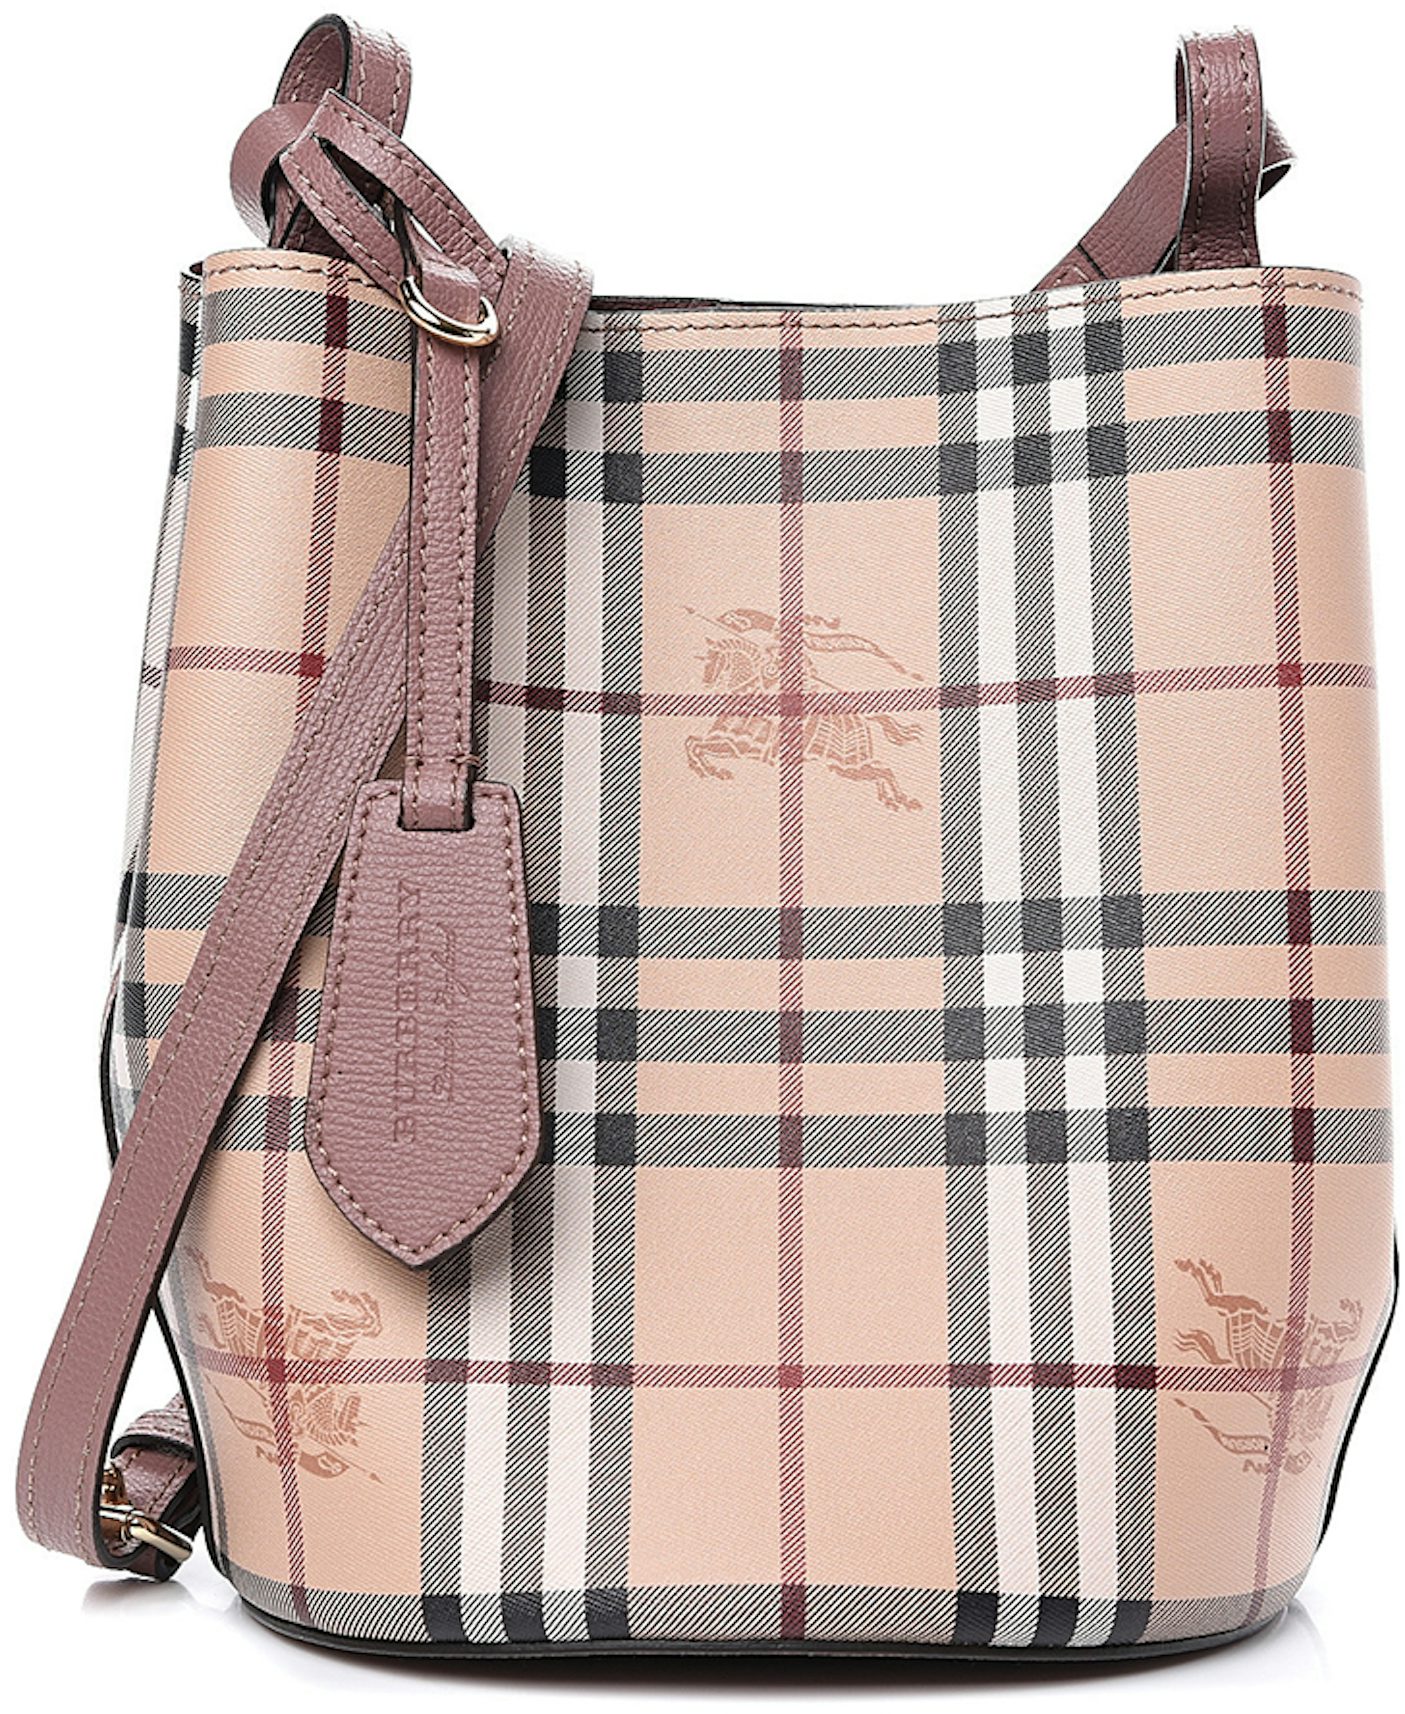 AUTH Burberry Pink Barrel Bag -Early 2000s